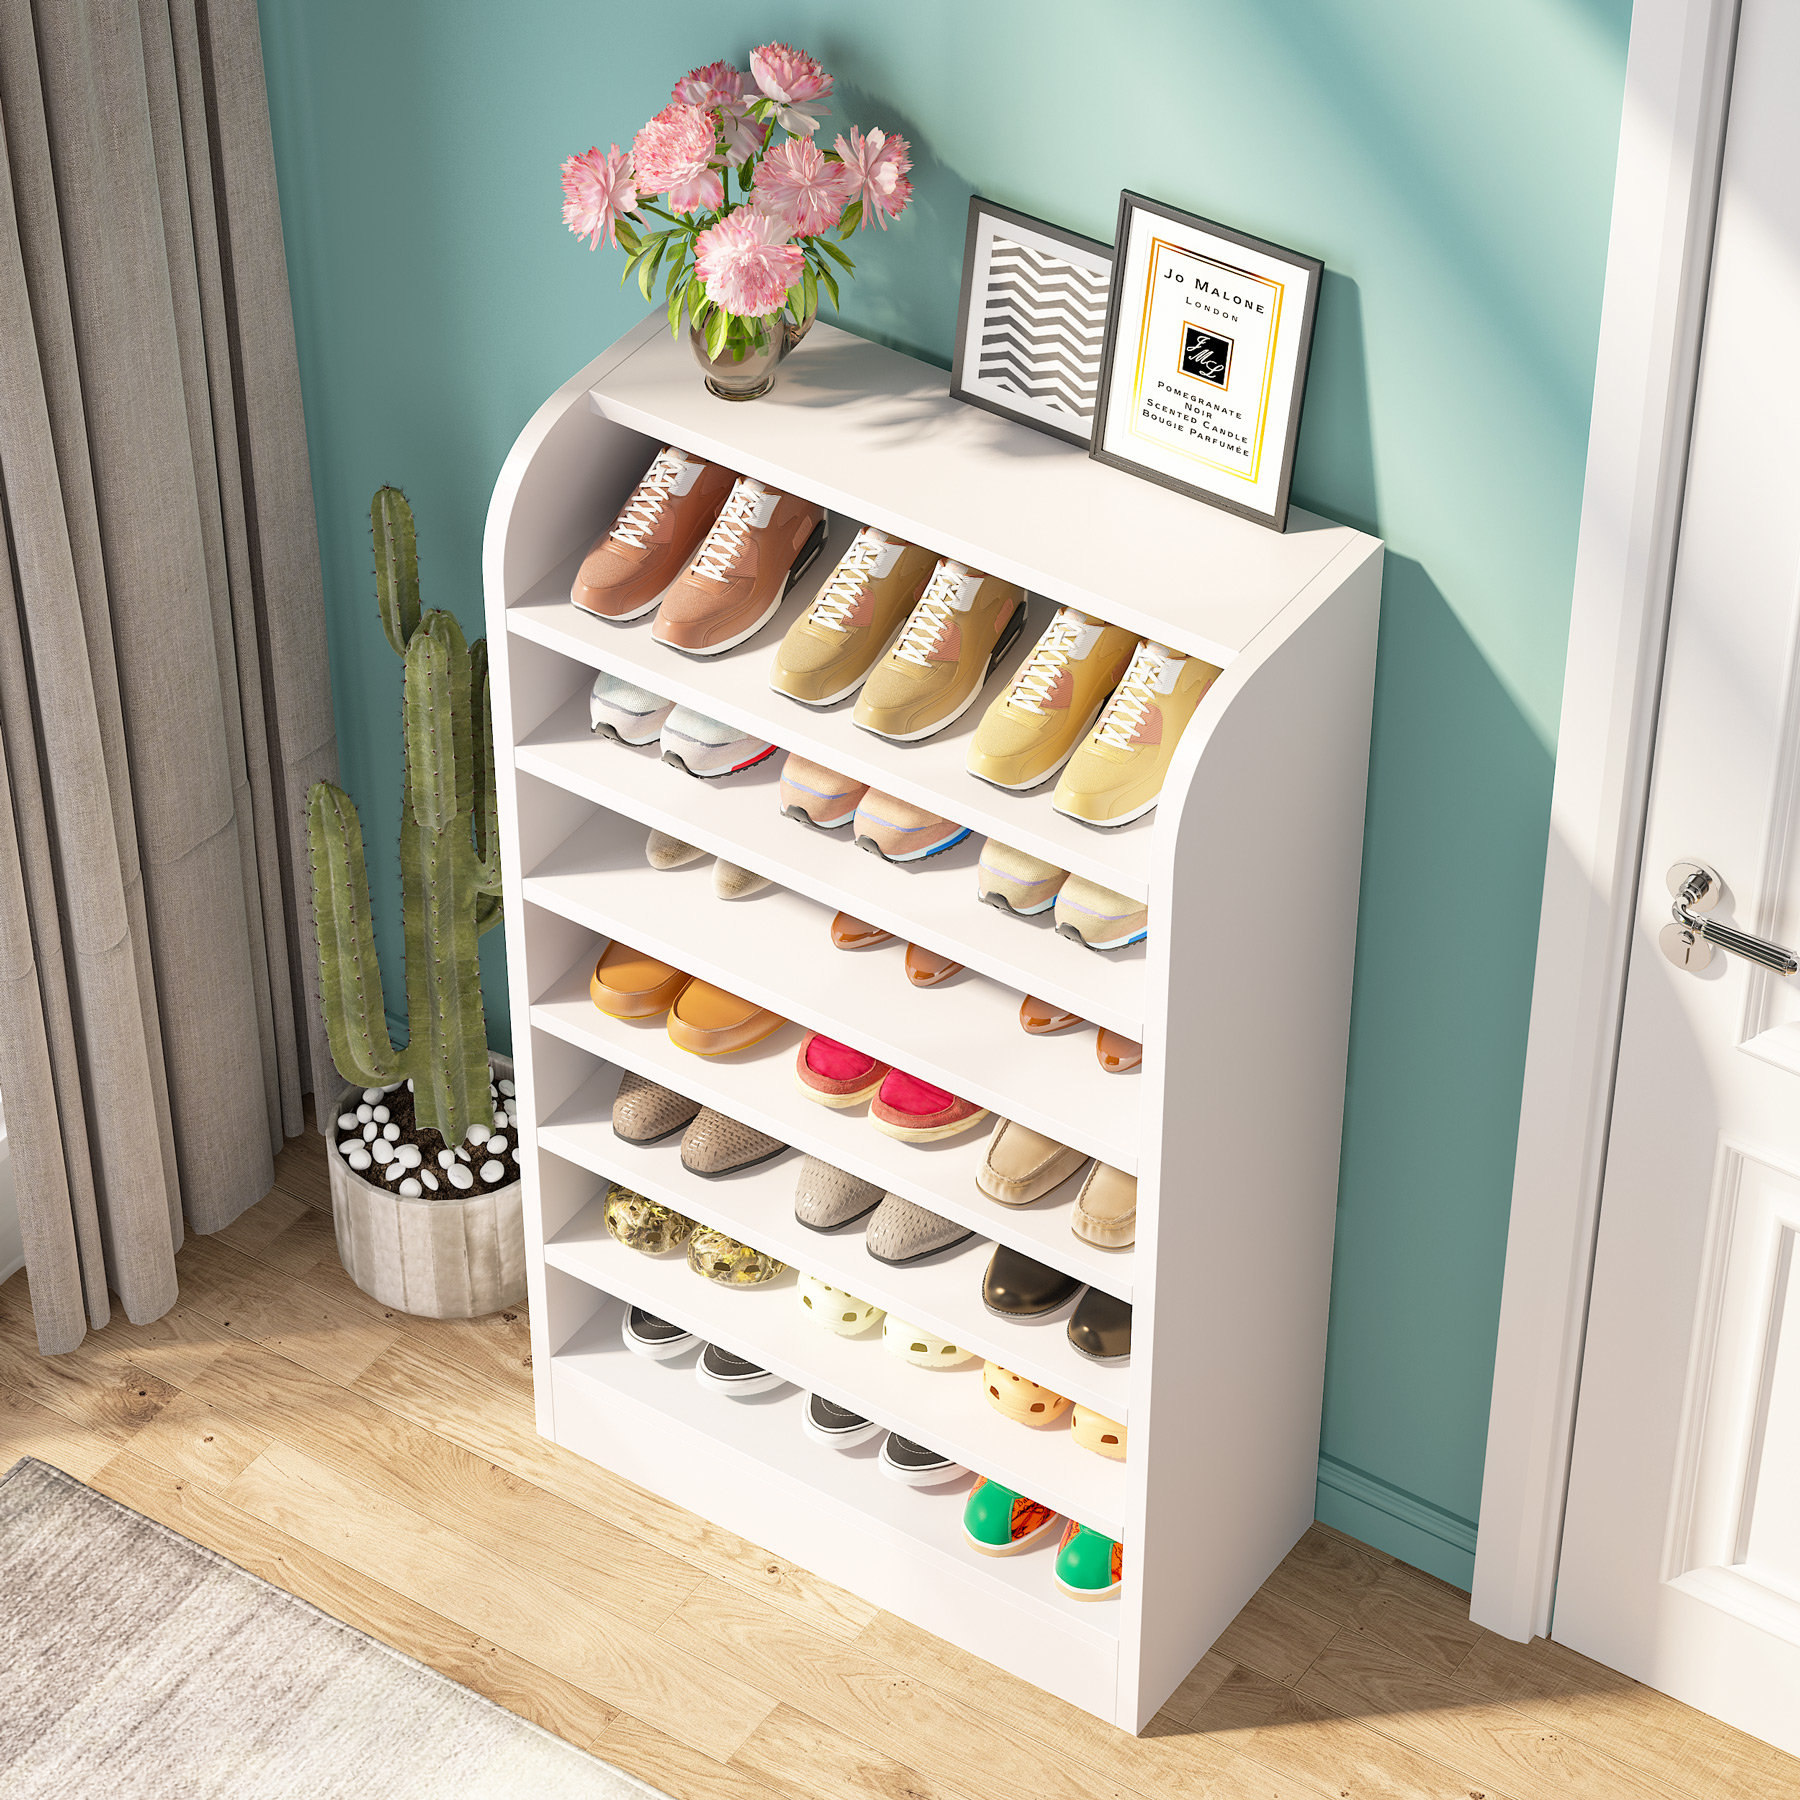 The 9 Best Shoe Racks of 2023 for Ample Organization, According to